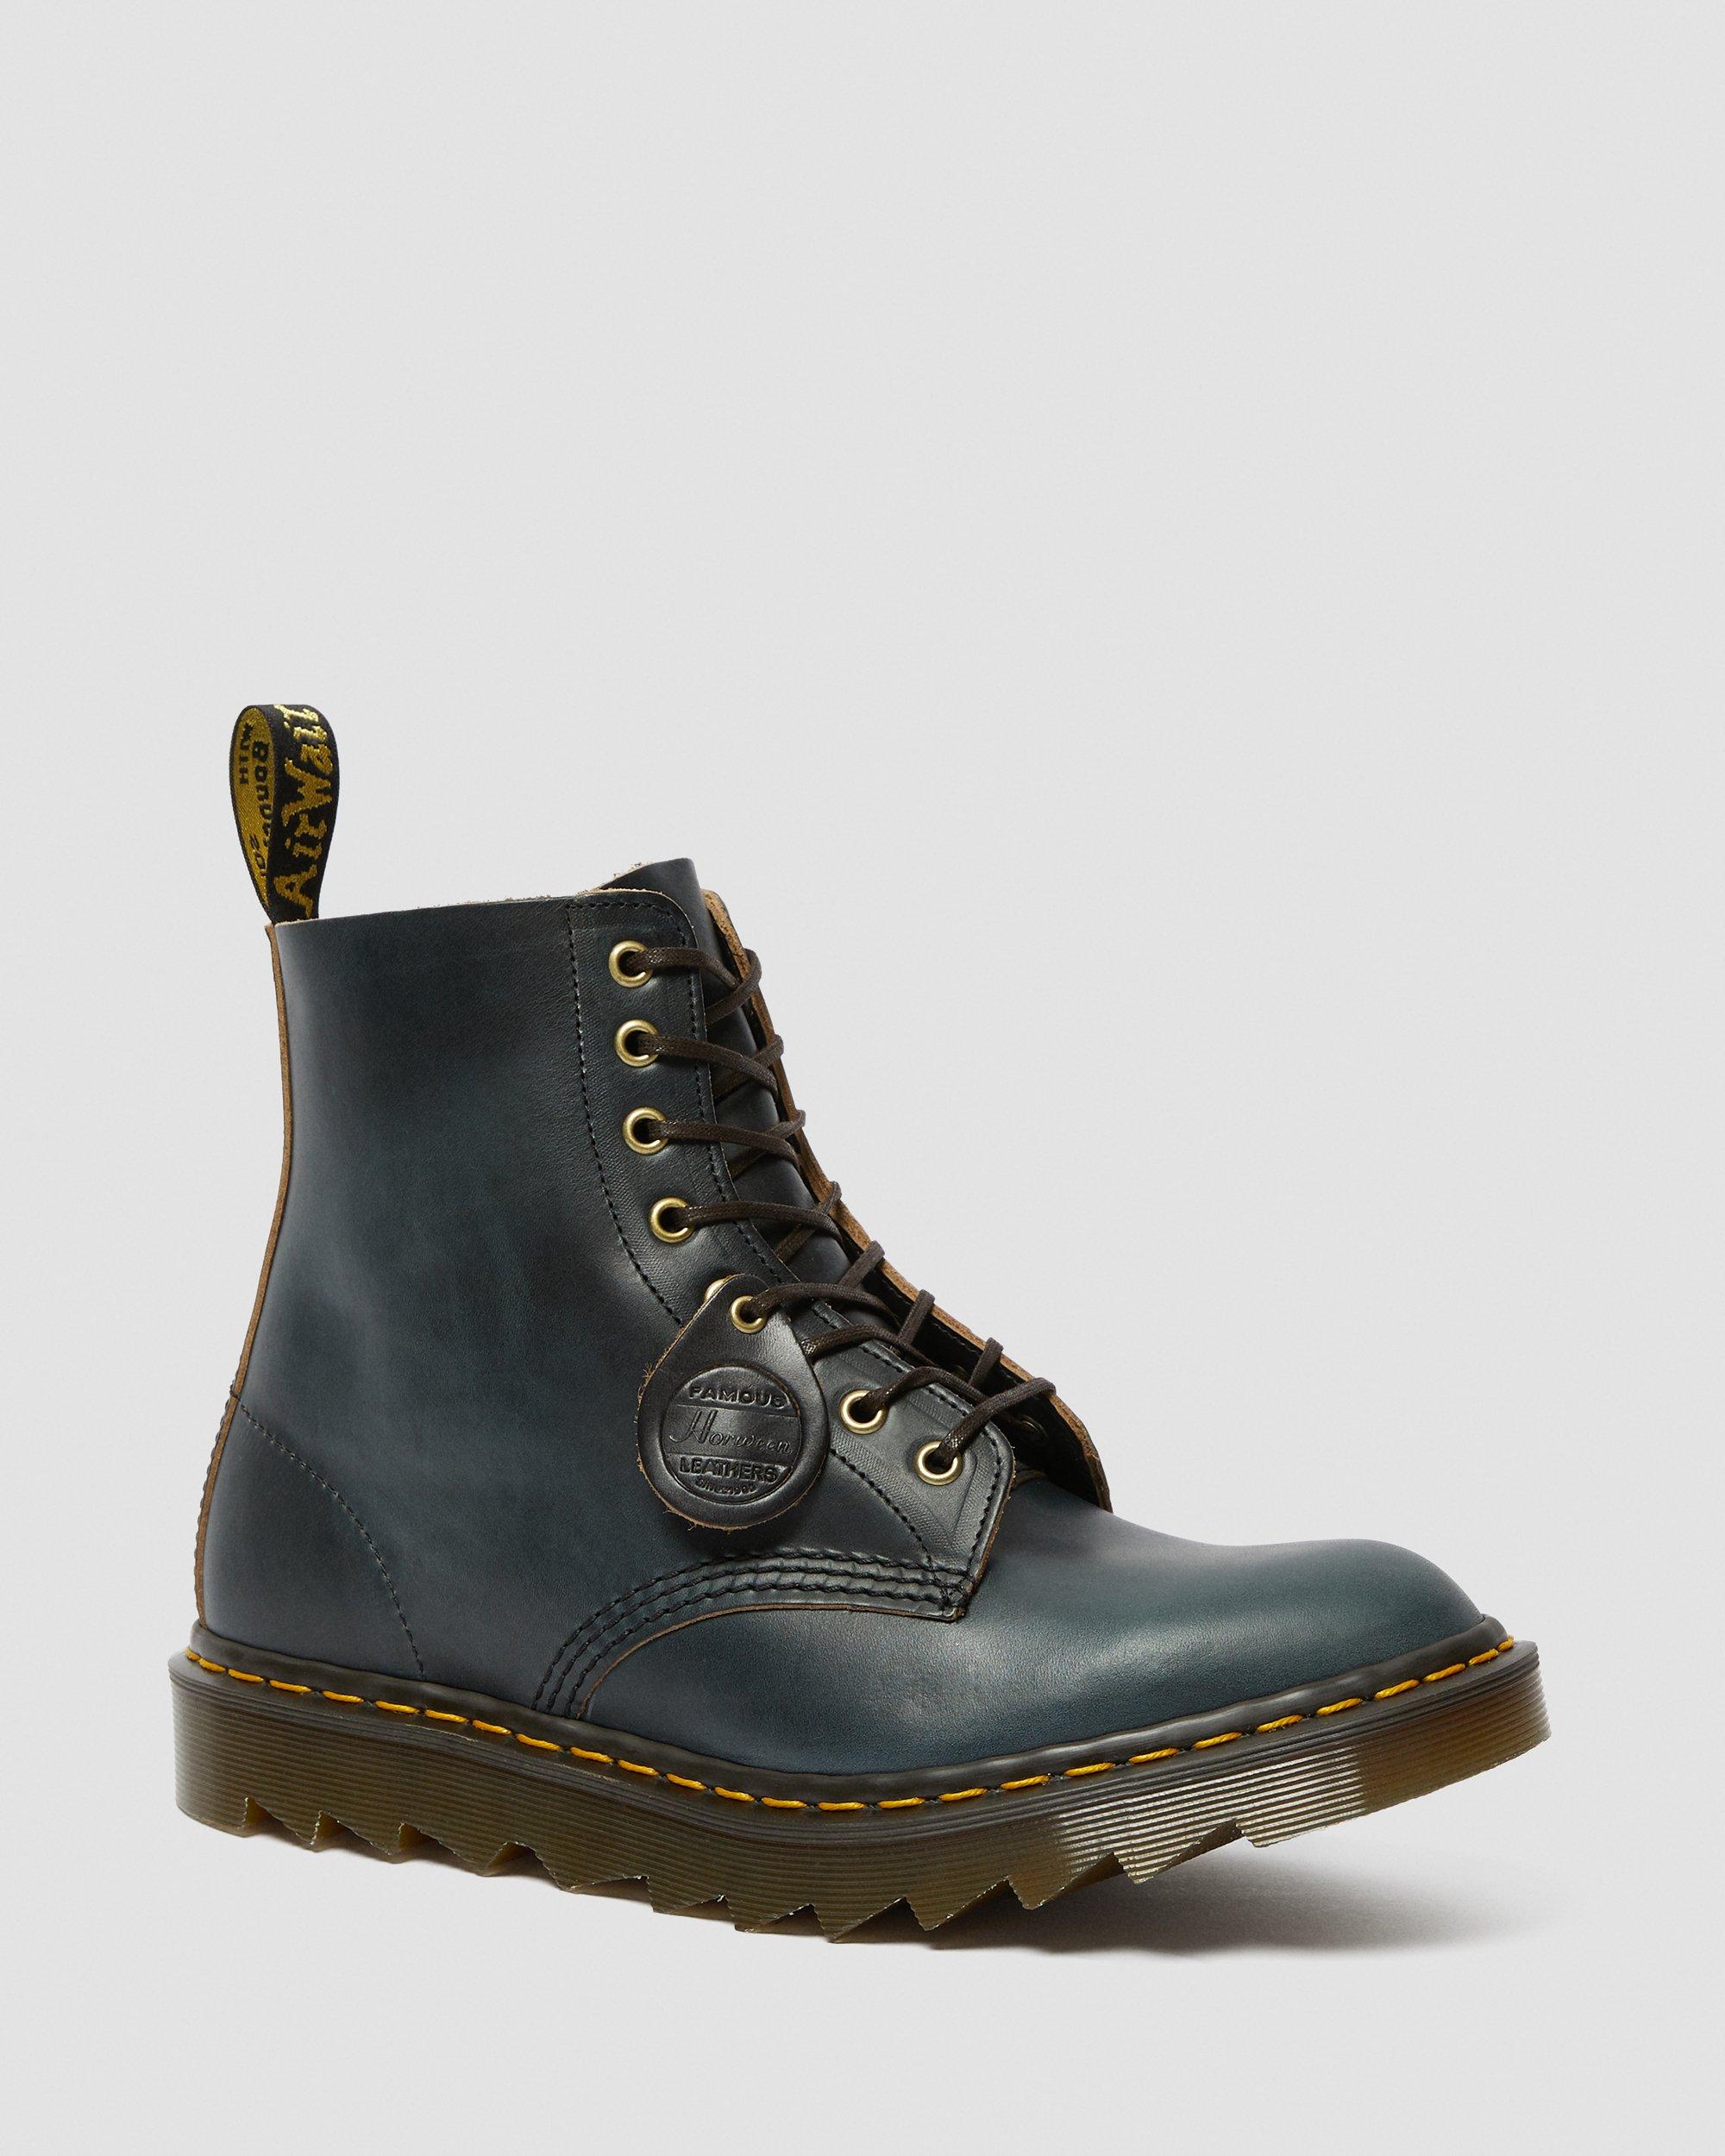 used dr martens size 7